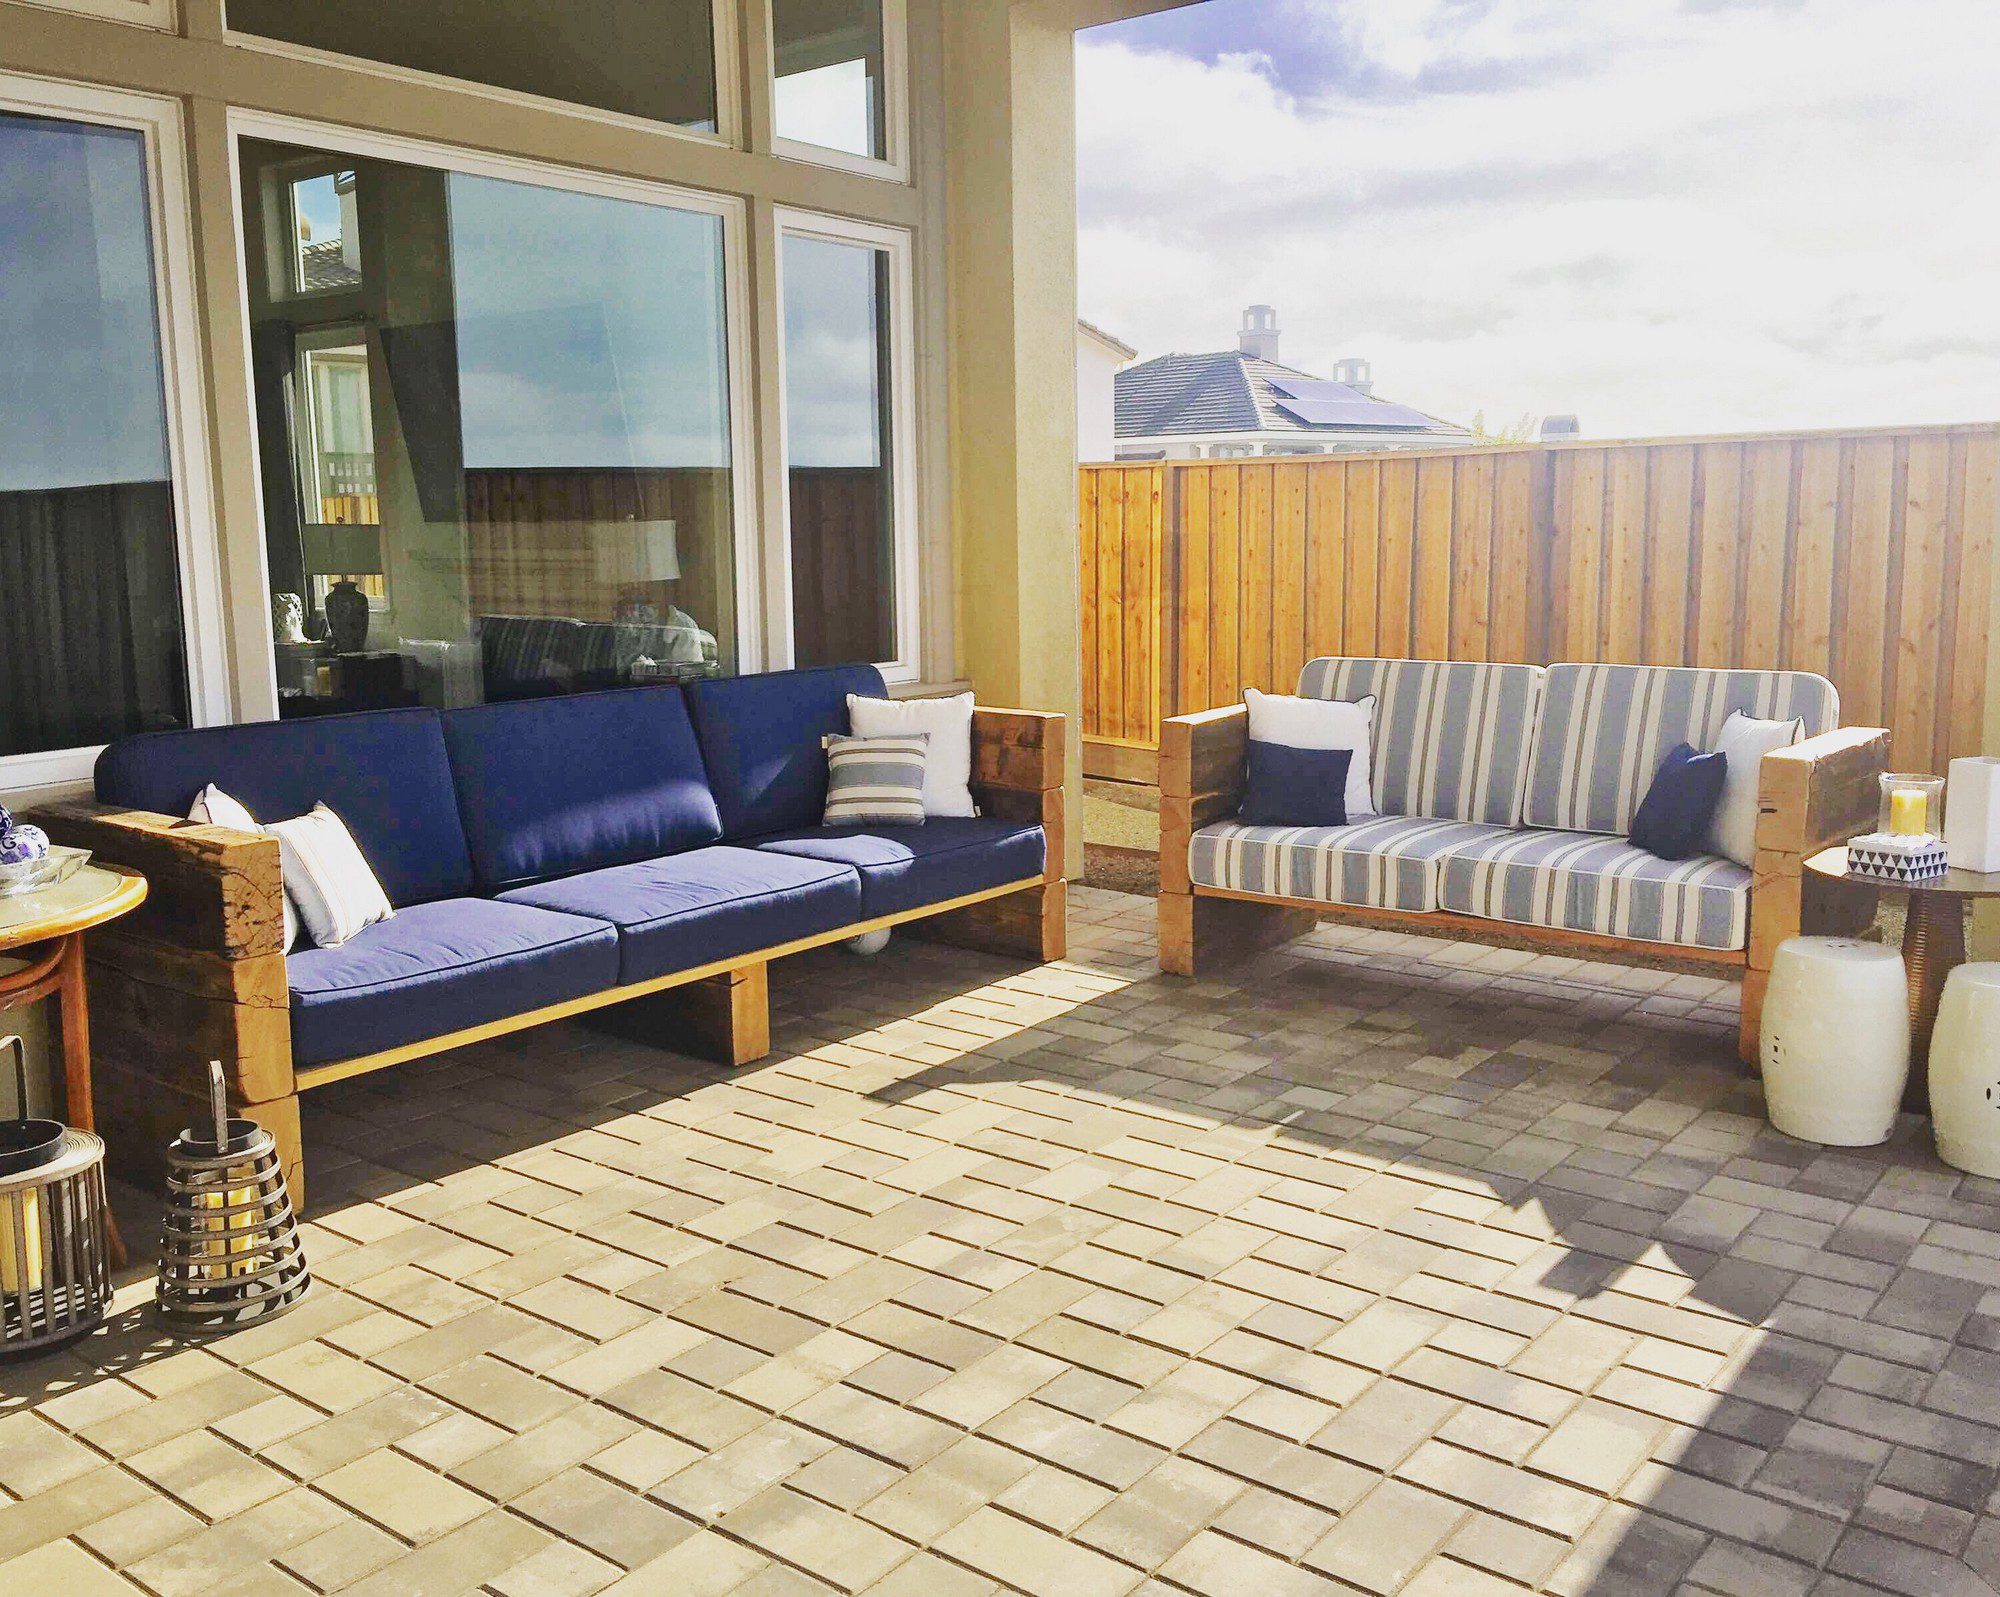 The image shows a nicely appointed outdoor patio area. There is a large sectional sofa with blue upholstery on the left and a smaller love seat with blue and white striped cushions on the right, both providing comfortable seating options. The flooring consists of a patterned arrangement of pavers. A wooden fence encloses the area, providing privacy.Decoration and additional furnishings include assorted pillows on the seats, a small table with what appears to be a tray on the sectional sofa, and two white ceramic garden stools that could serve as side tables or extra seating. There are also two lantern-style objects on the floor, potentially for candles or decorative lighting. Large windows of a house can be seen reflecting the sky, which also hint at the patio being adjacent to the residence. The setting suggests a pleasant spot for relaxation, socializing, or enjoying the outdoors.